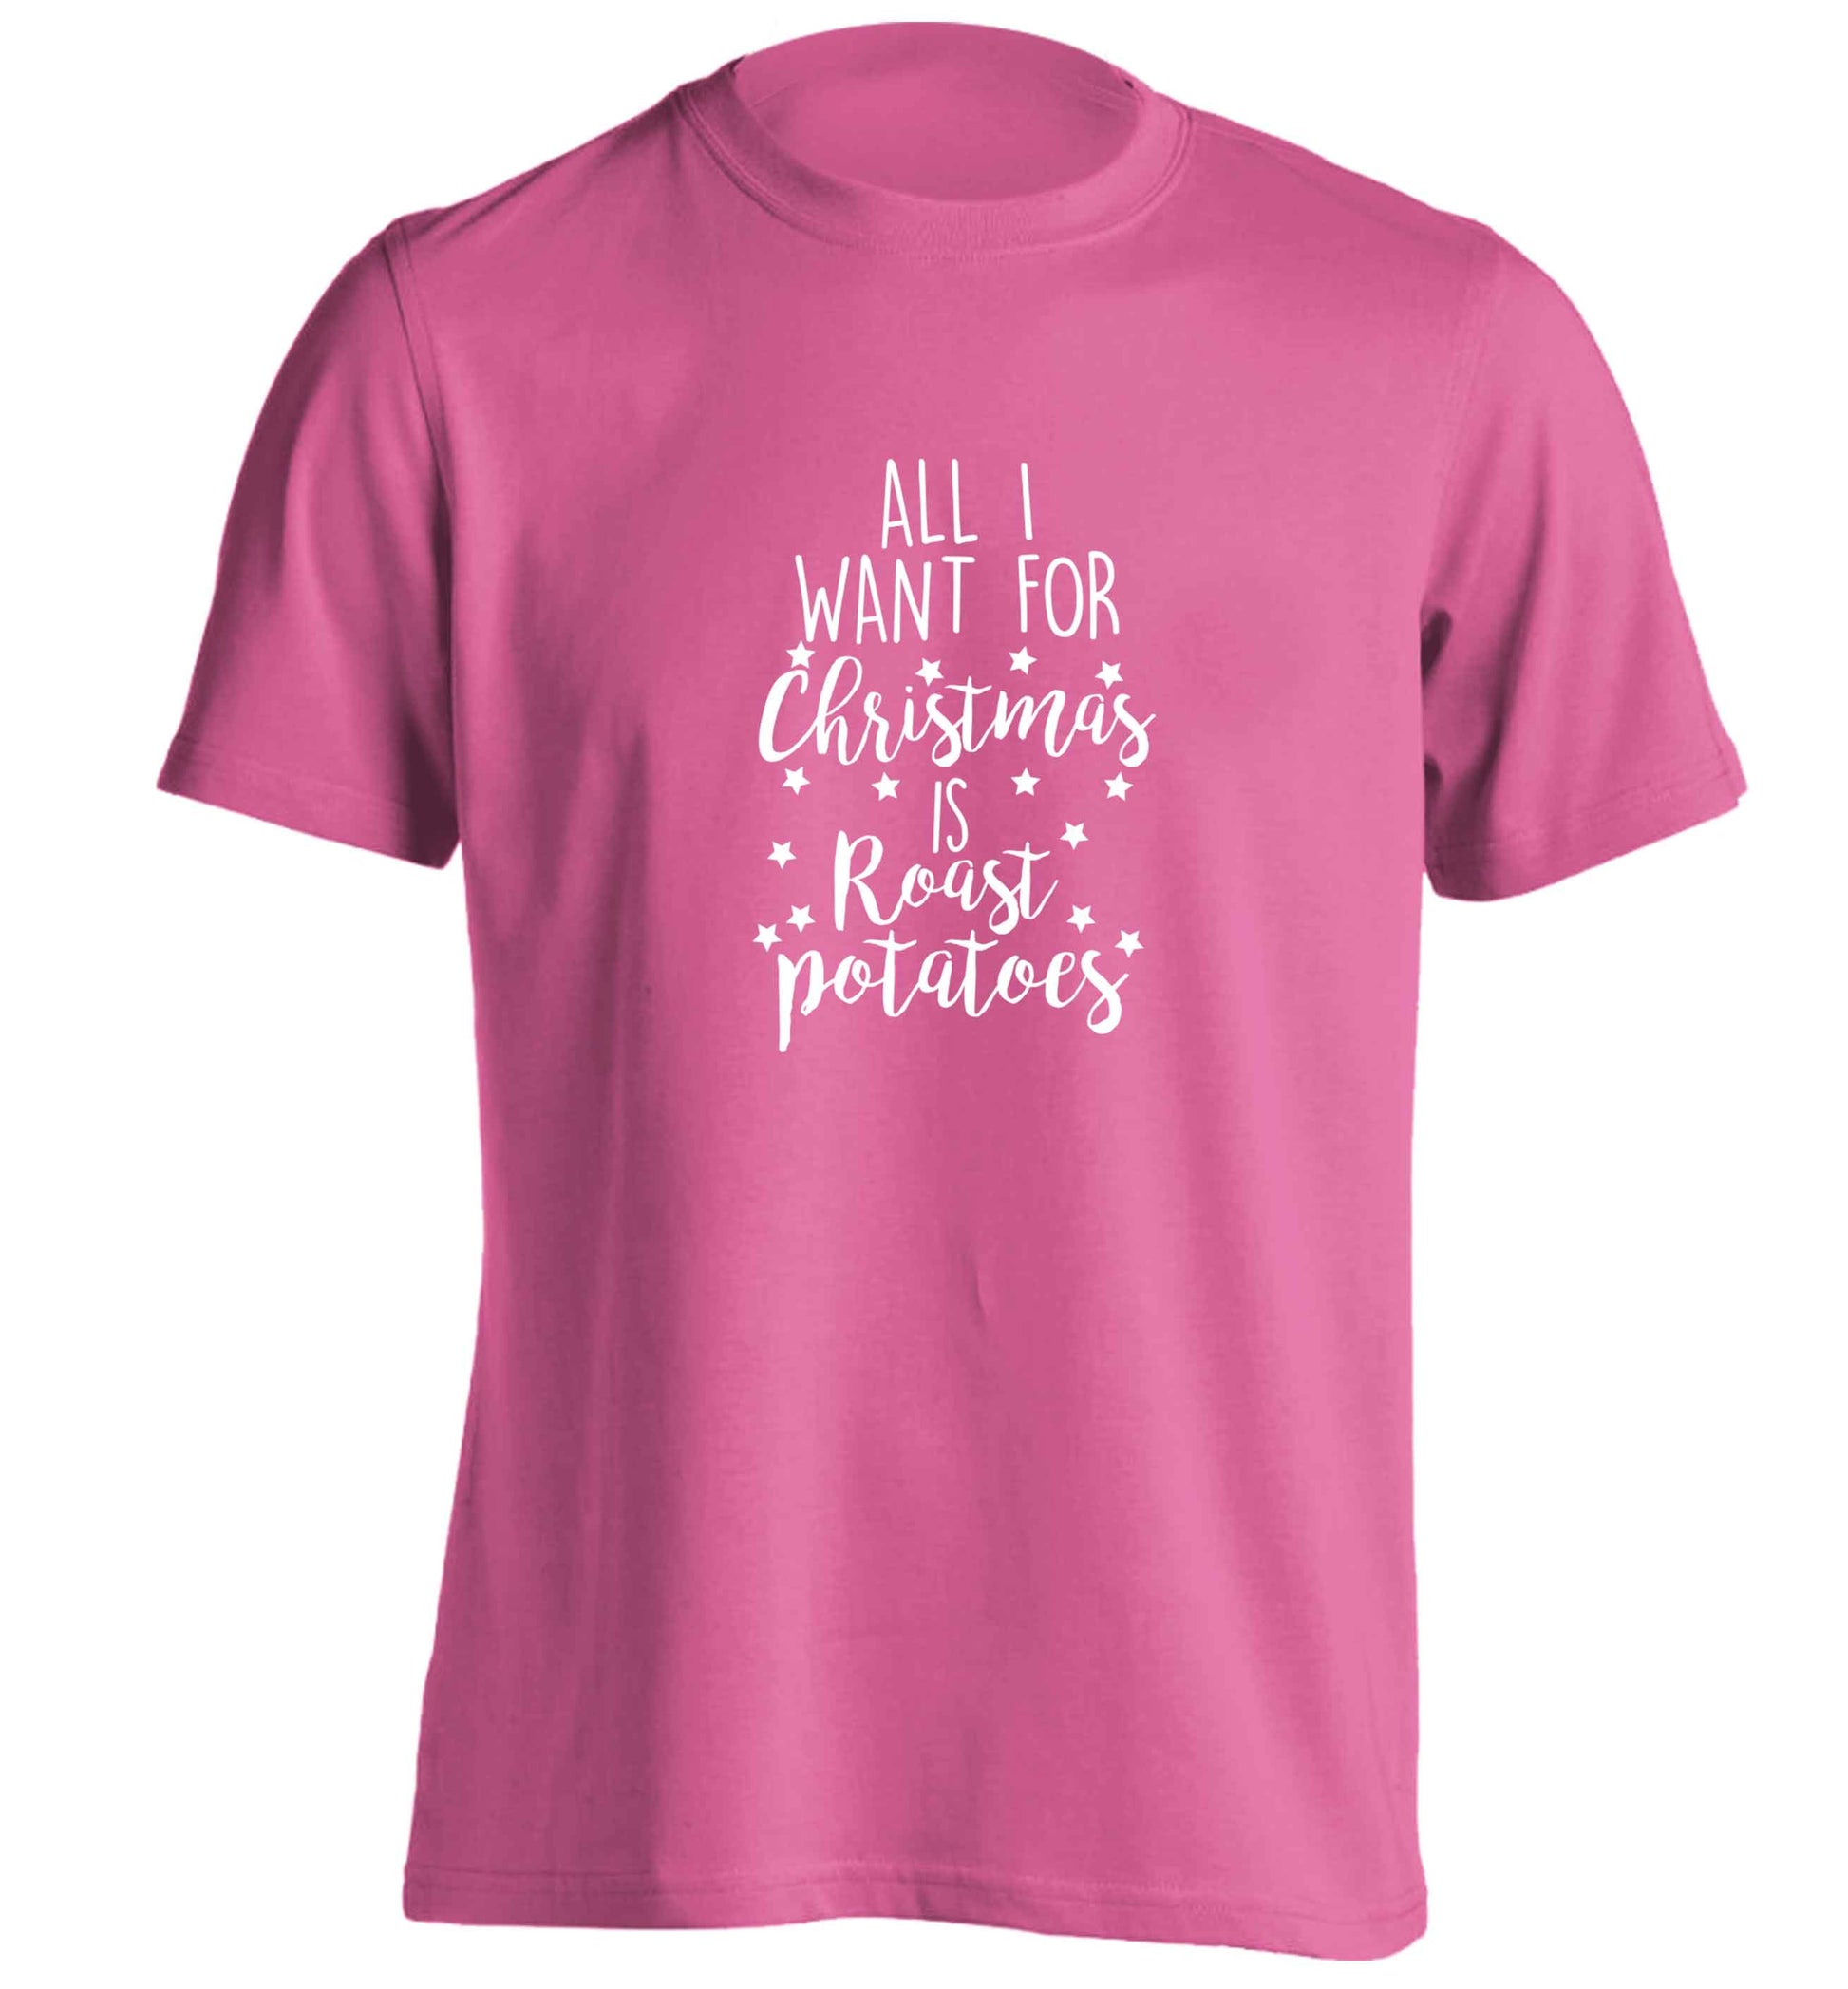 All I want for Christmas is roast potatoes adults unisex pink Tshirt 2XL